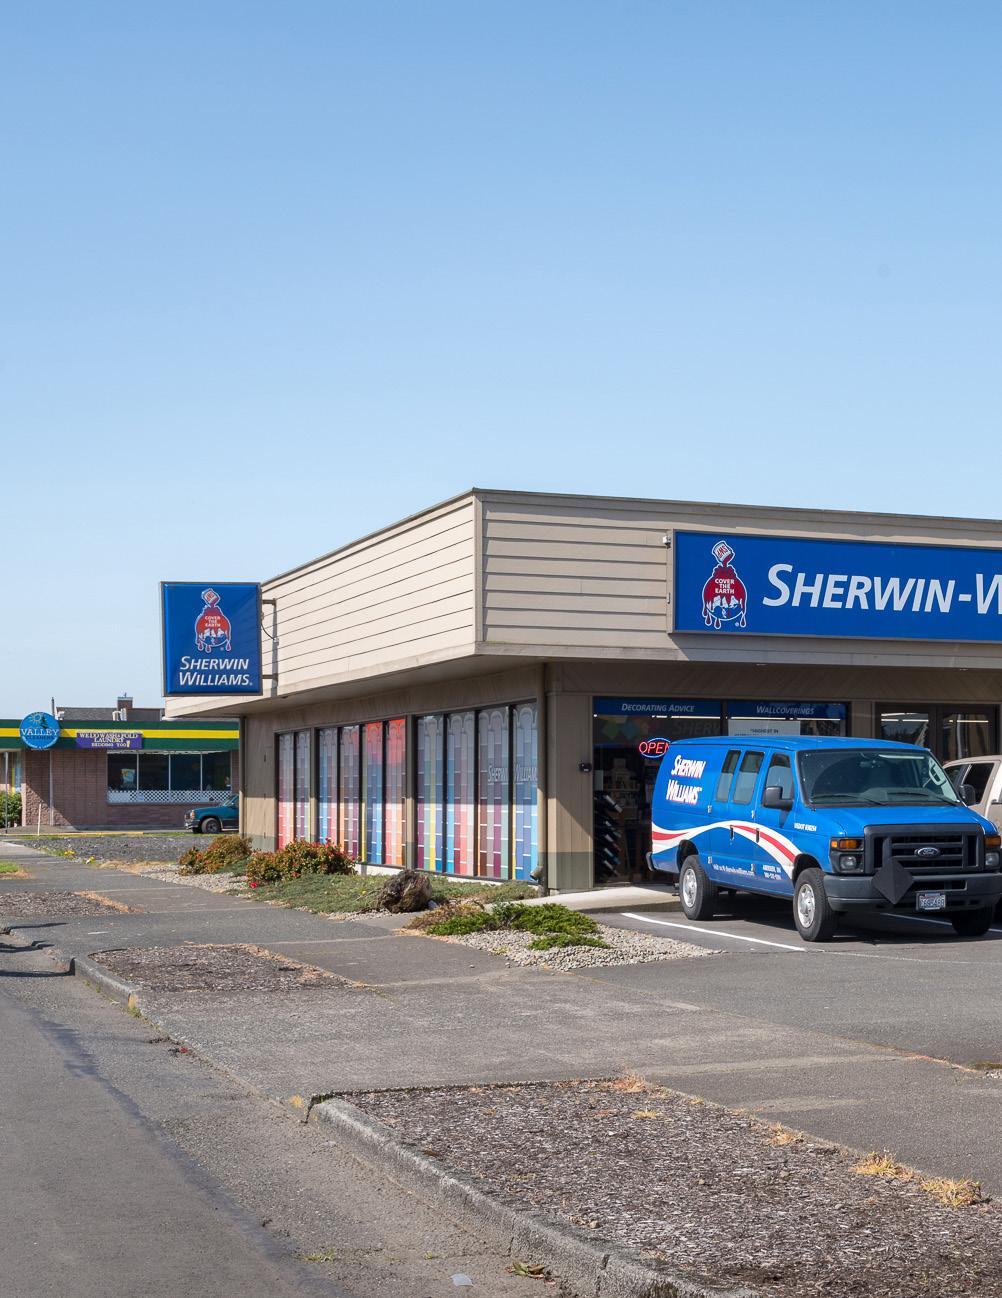 LEASE SUMMARY GUARANTOR: SQFT OCCUPIED: TERM: OPTIONS: LEASE TYPE: Sherwin-Williams 5,237 SqFt 10-Year Term ONE, 5-YEAR OPTION at $6,415 Mo / $76,980 Yr Modified Gross Sherwin-Williams Lease Landlord